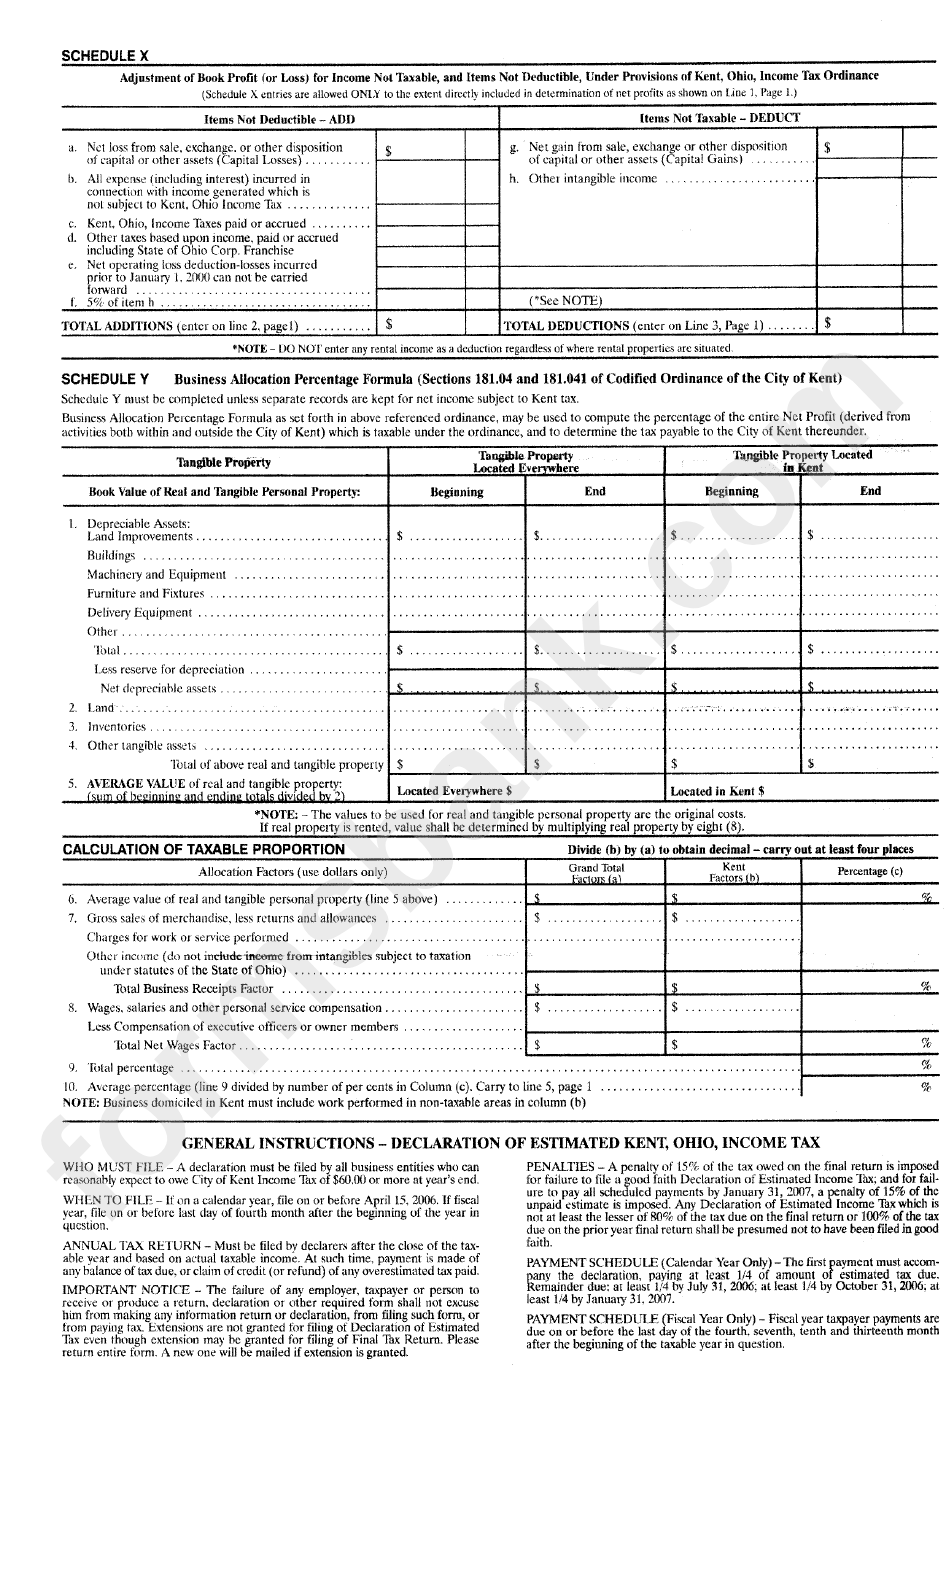 Form Br-05 - Business Income Tax Return 2005